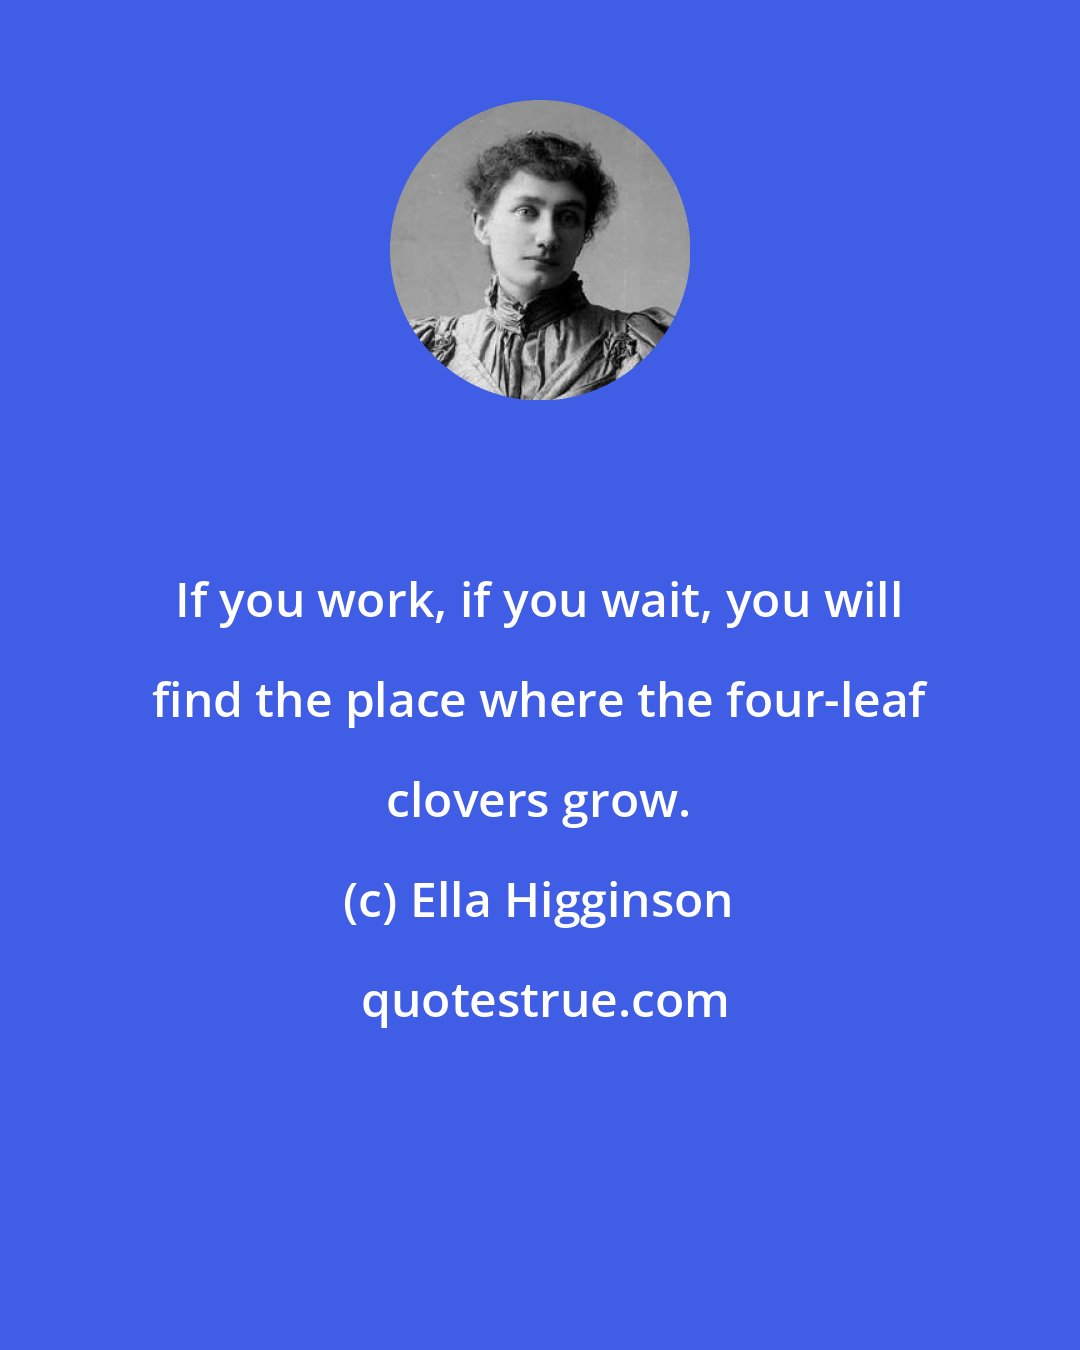 Ella Higginson: If you work, if you wait, you will find the place where the four-leaf clovers grow.